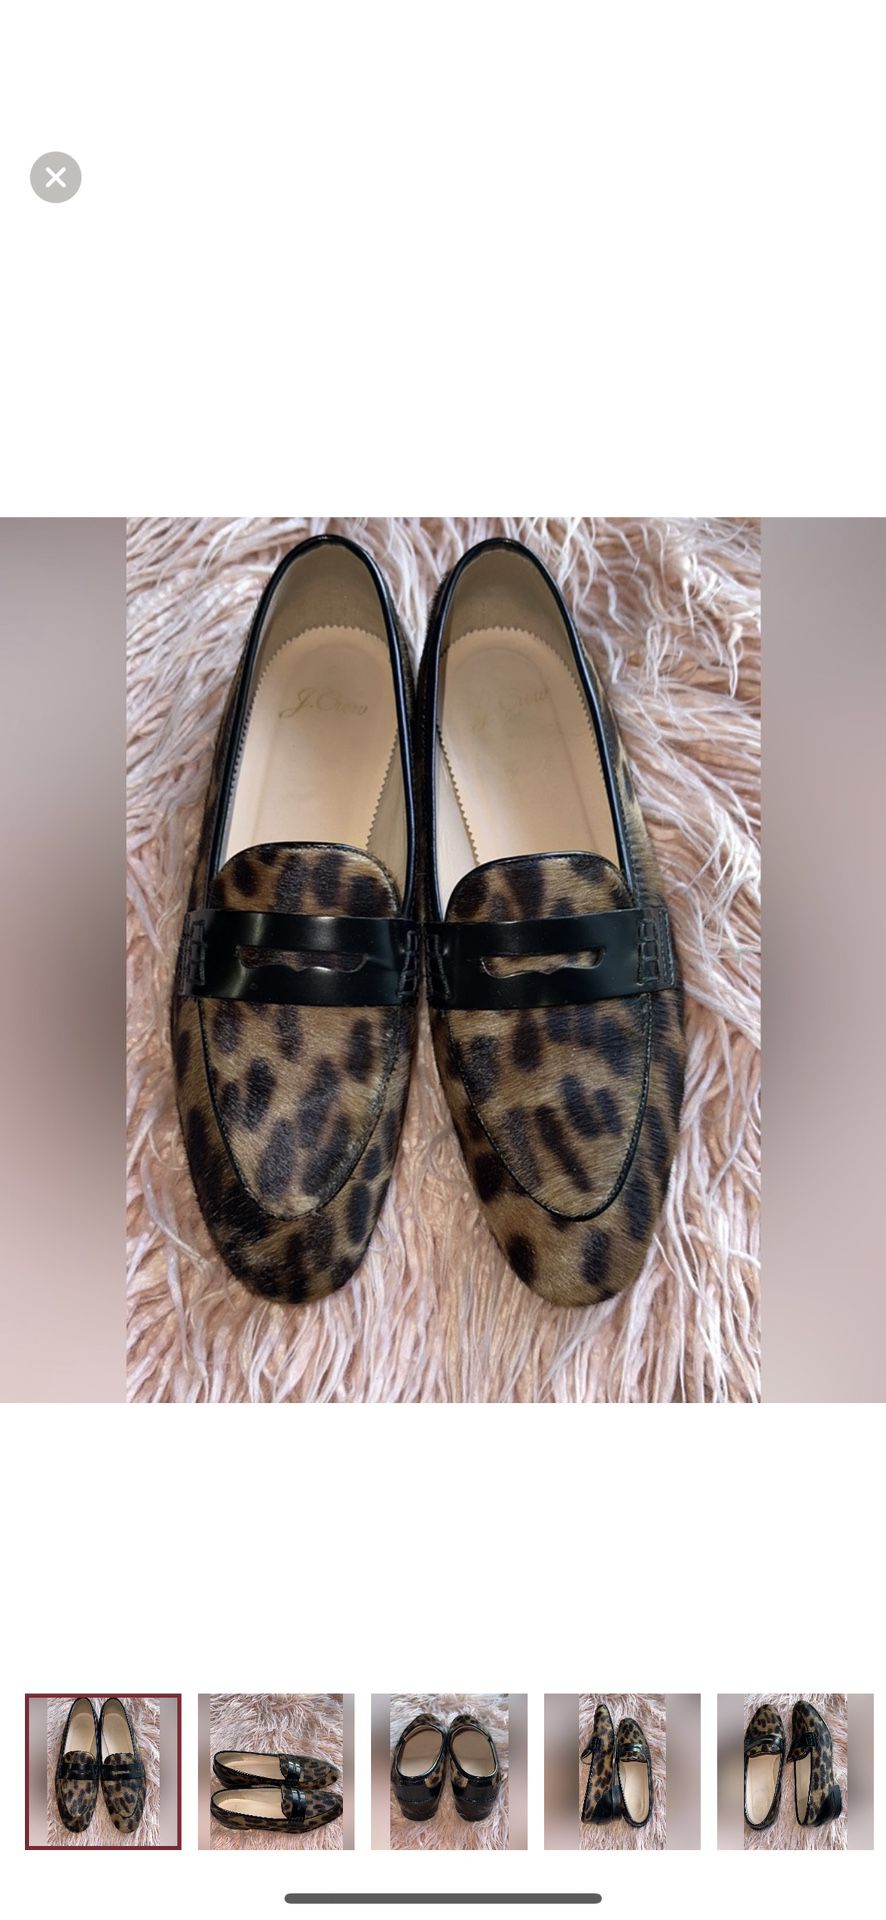 J Crew Collection Women Academy Calf Hair LEOPARD Flat Loafers Size 7.5